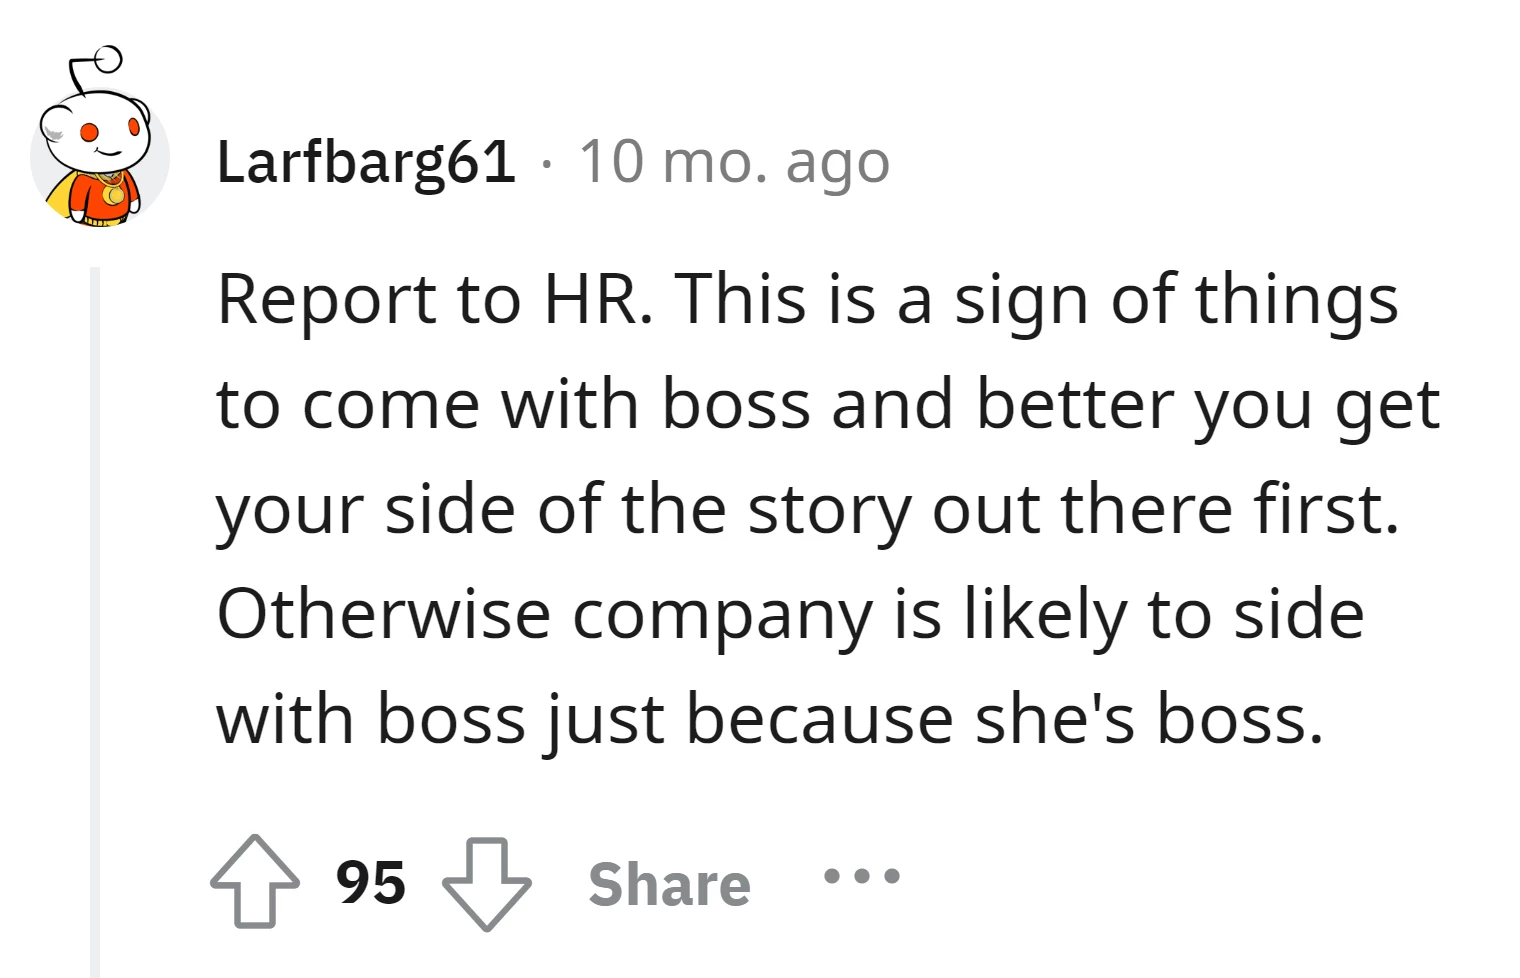 Report the incident to HR